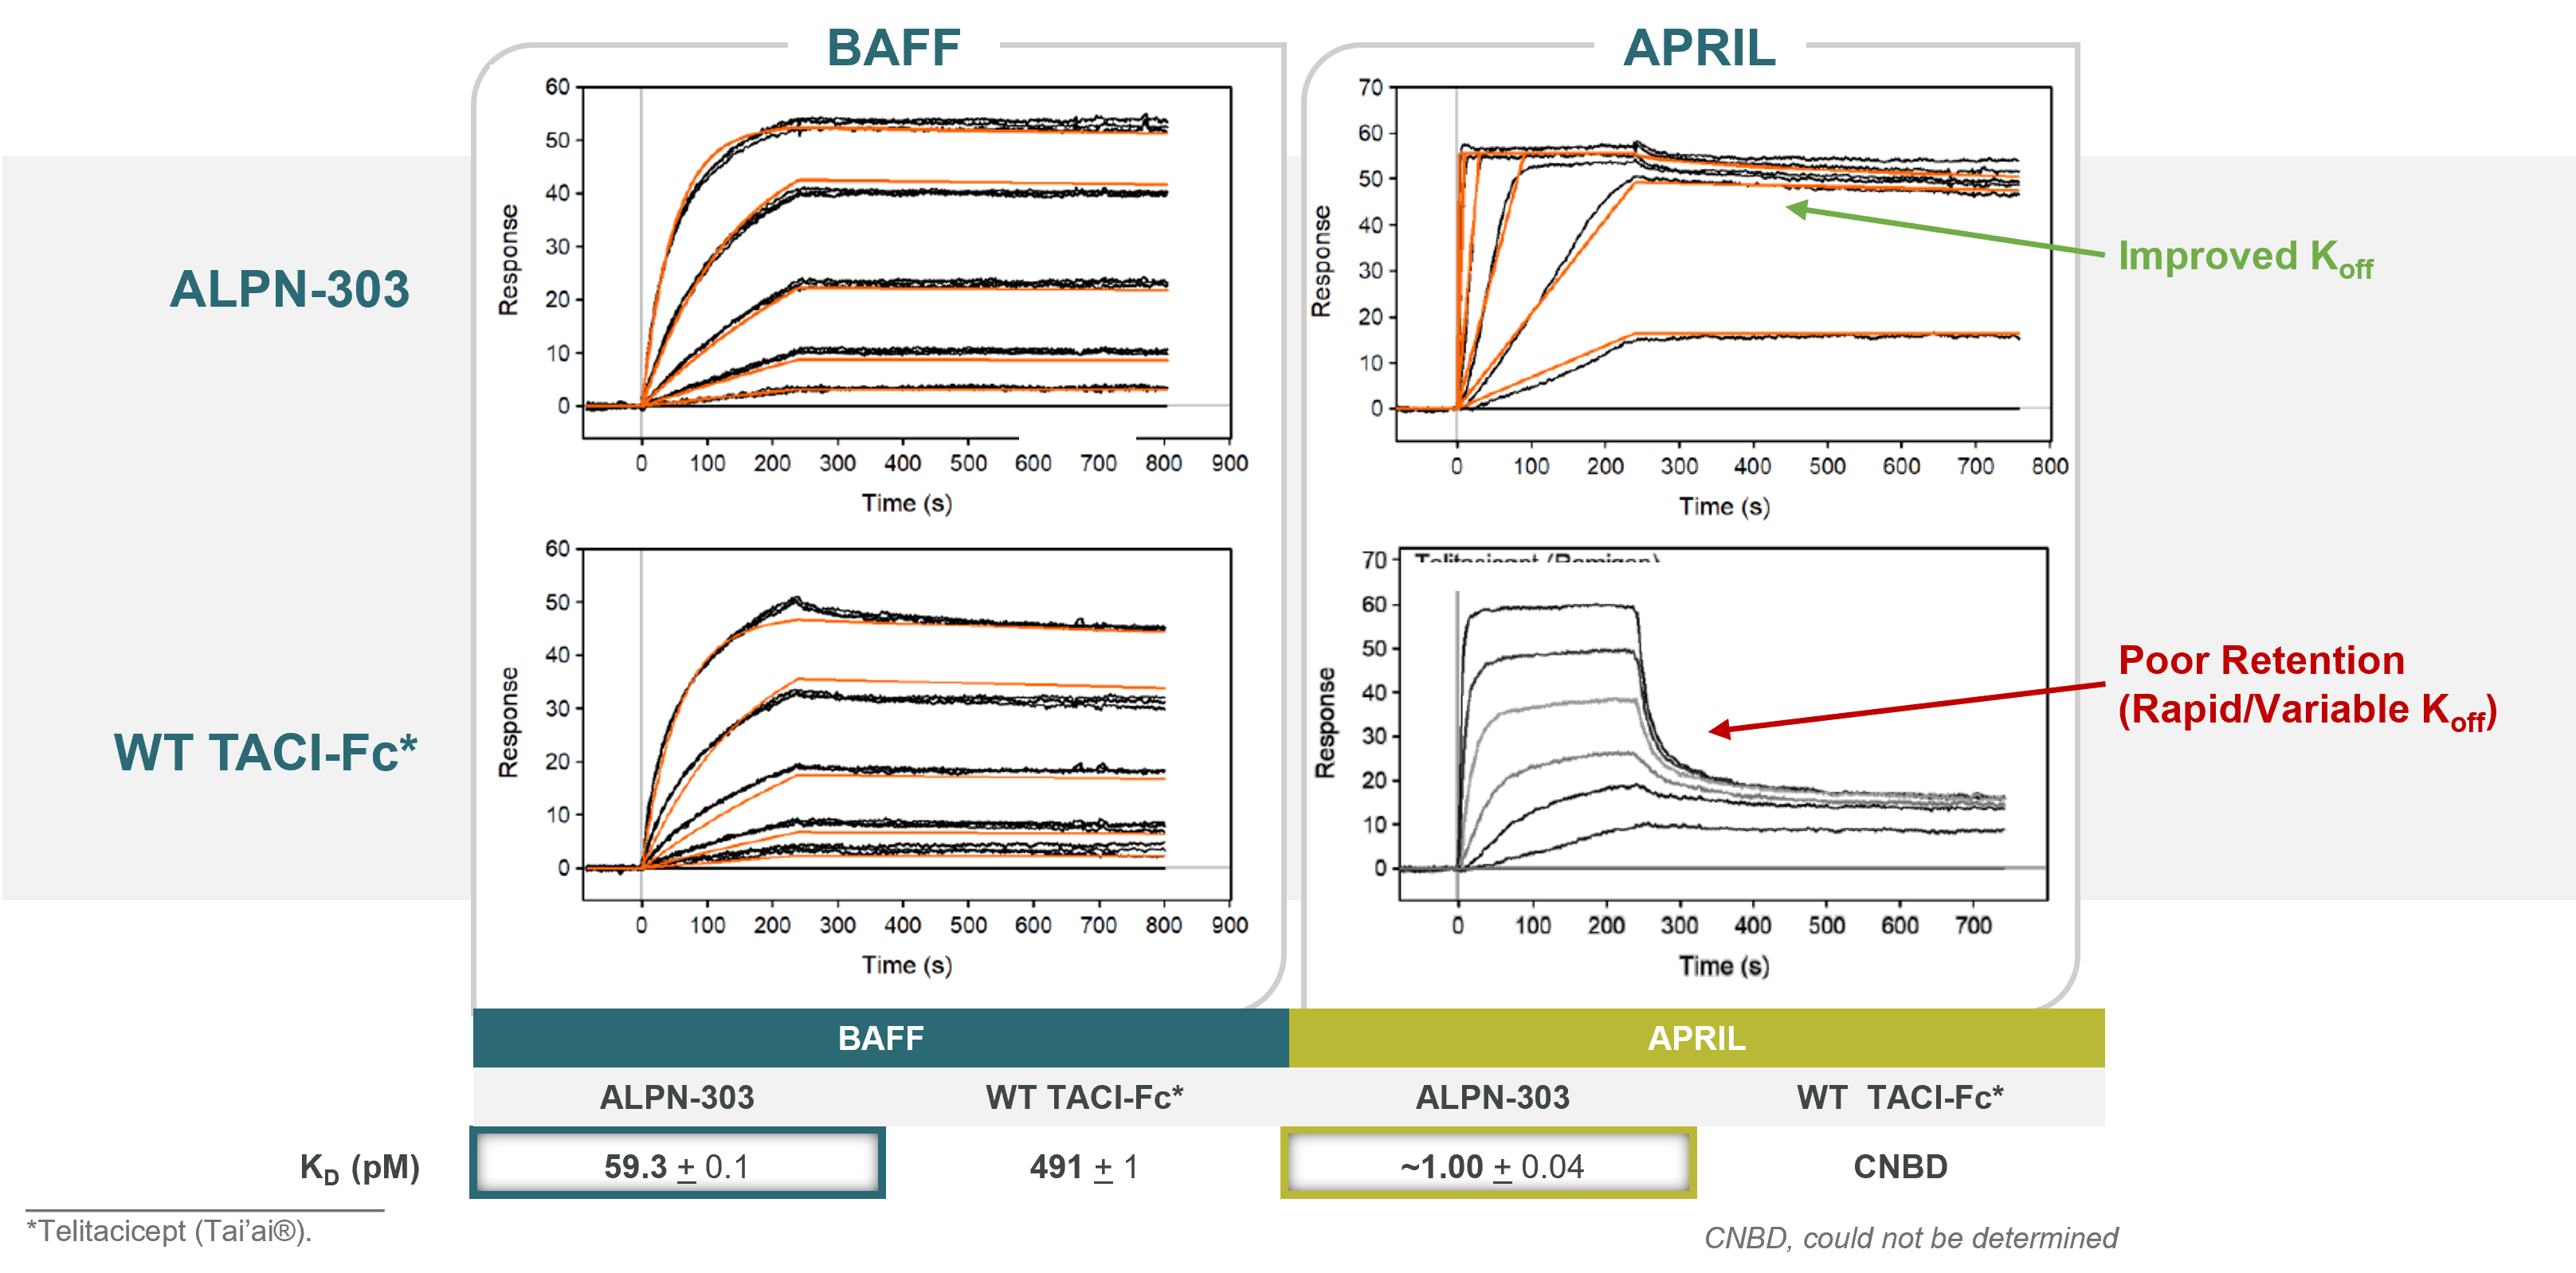 ALPN-303 Addresses a Key Weakness in WT TACI ALPN-303 improves affinity of TACI against BAFF 8 to 10-fold, and dramatically improved the affinity against APRIL.